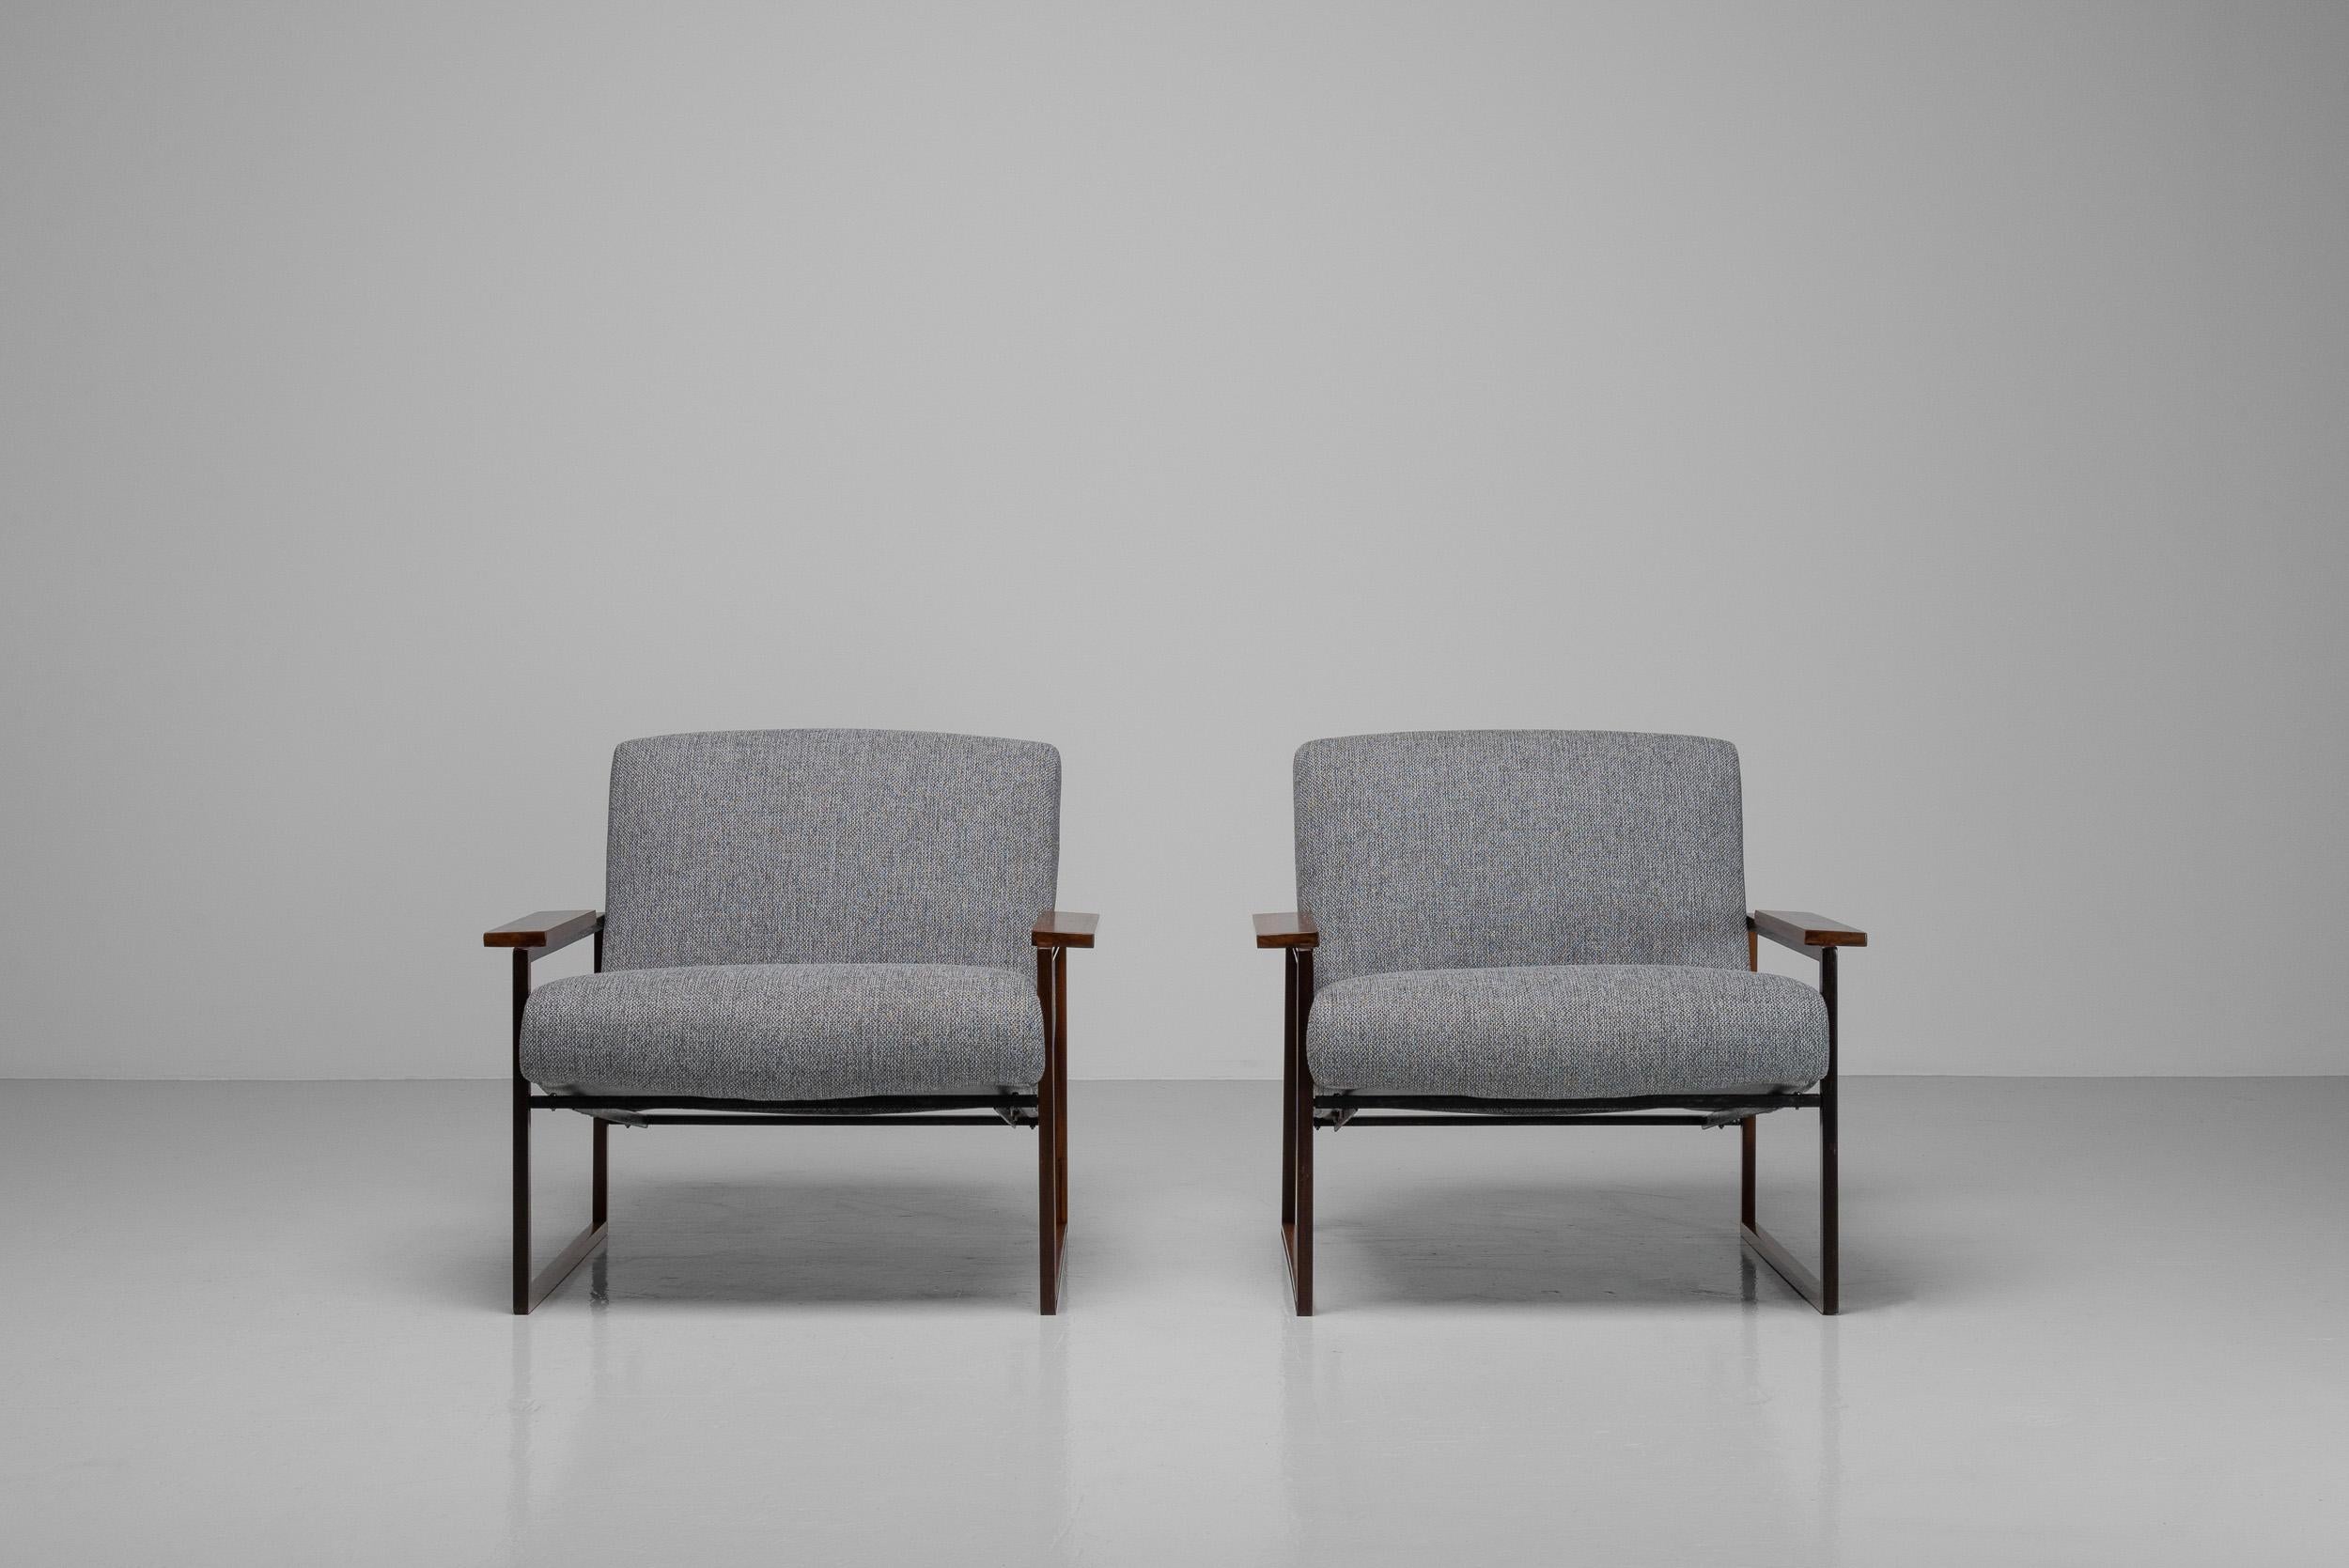 Percival Lafer Mp-5 lounge chairs pair Brazil 1961 For Sale 1